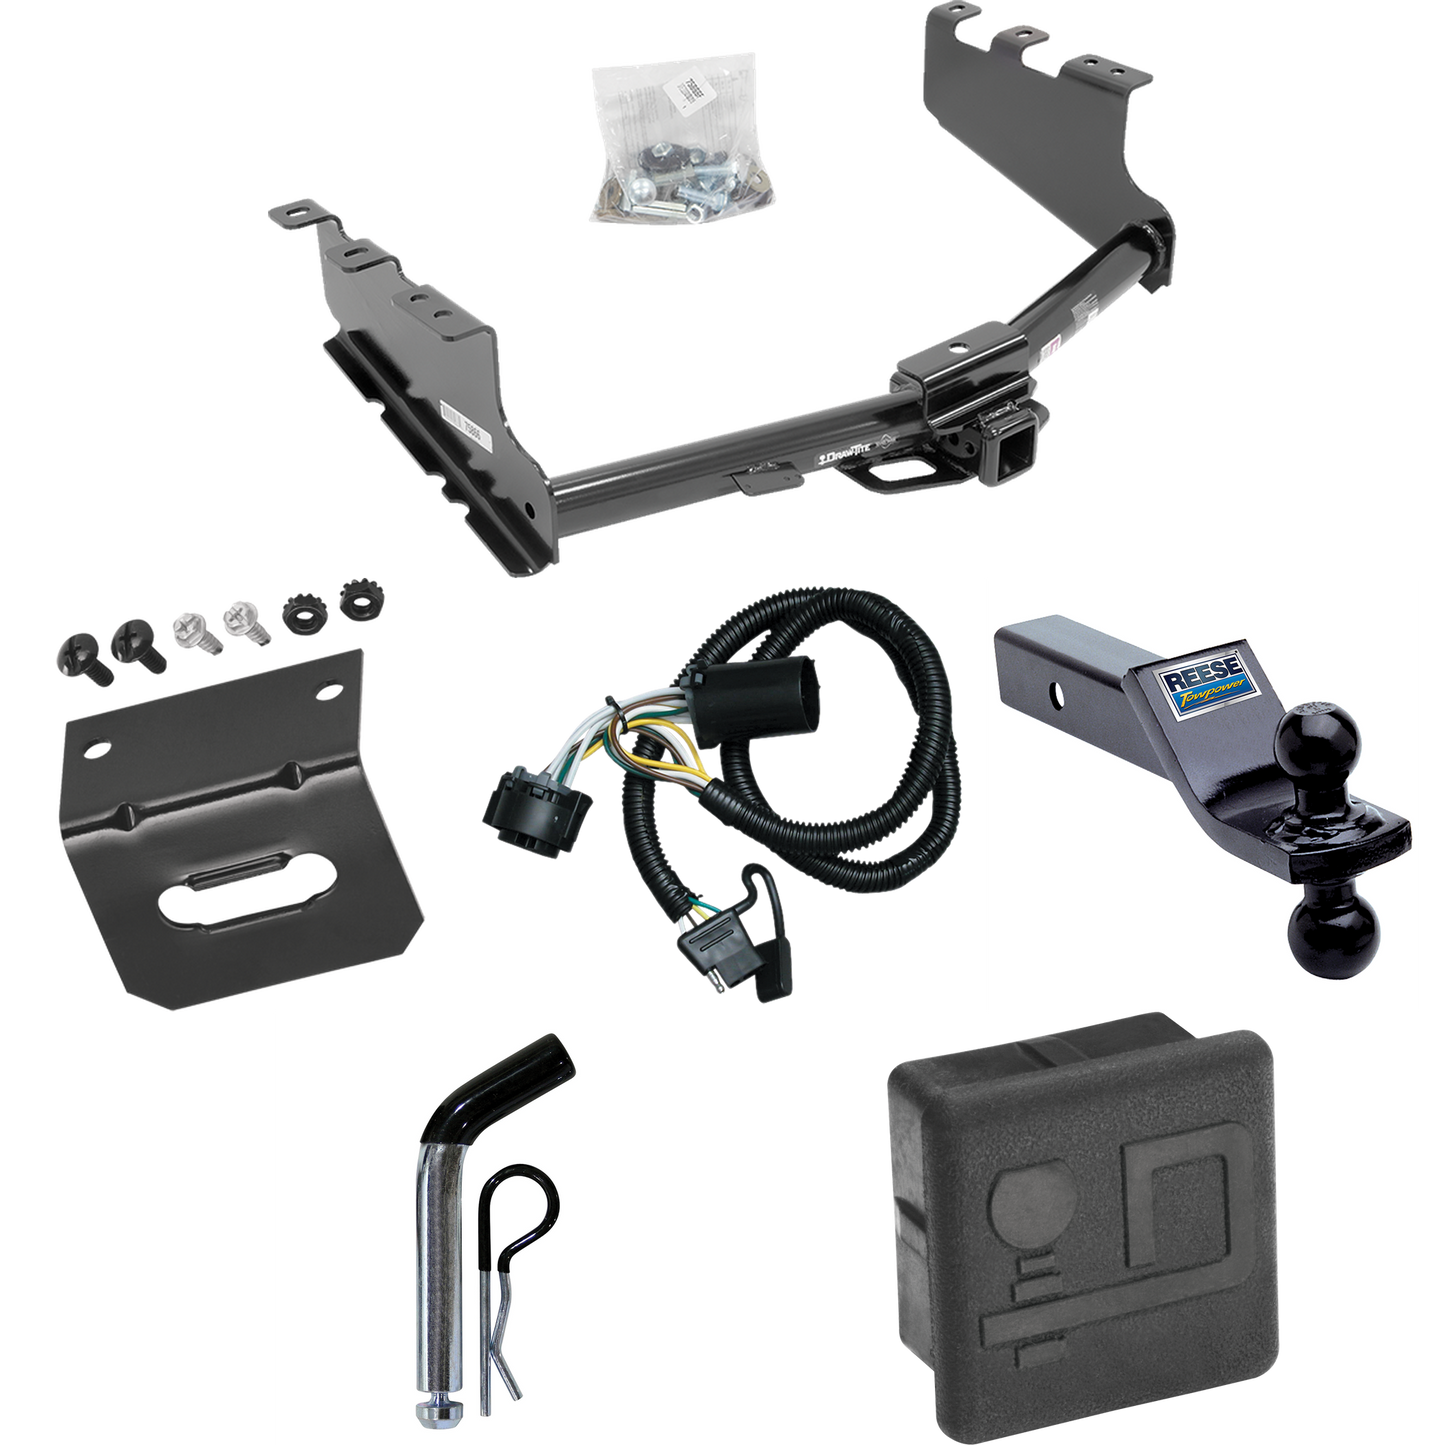 Fits 2019-2019 GMC Sierra 1500 LD (Old Body) Trailer Hitch Tow PKG w/ 4-Flat Wiring + Dual Ball Ball Mount 1-7/8" & 2" Trailer Balls + Pin/Clip + Wiring Bracket + Hitch Cover By Draw-Tite